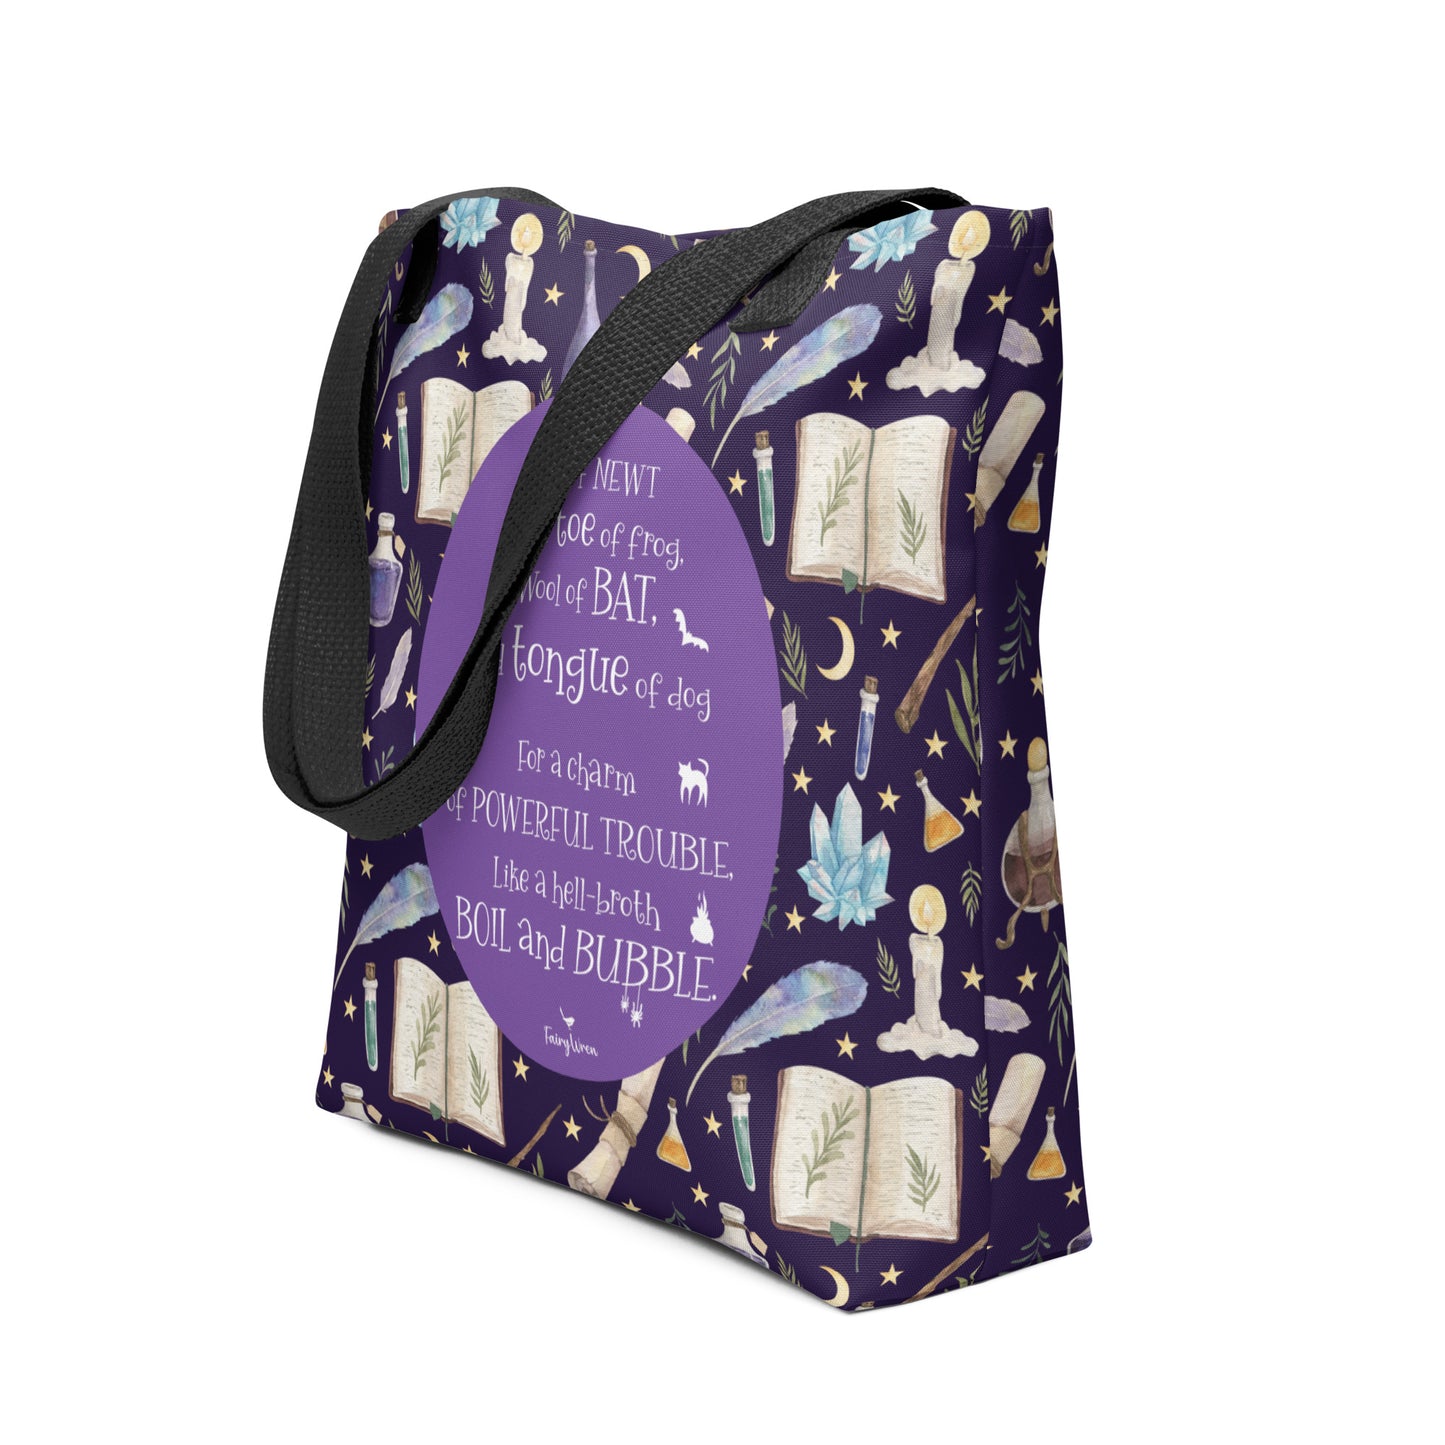 Double Double Toil and Trouble Tote Bag